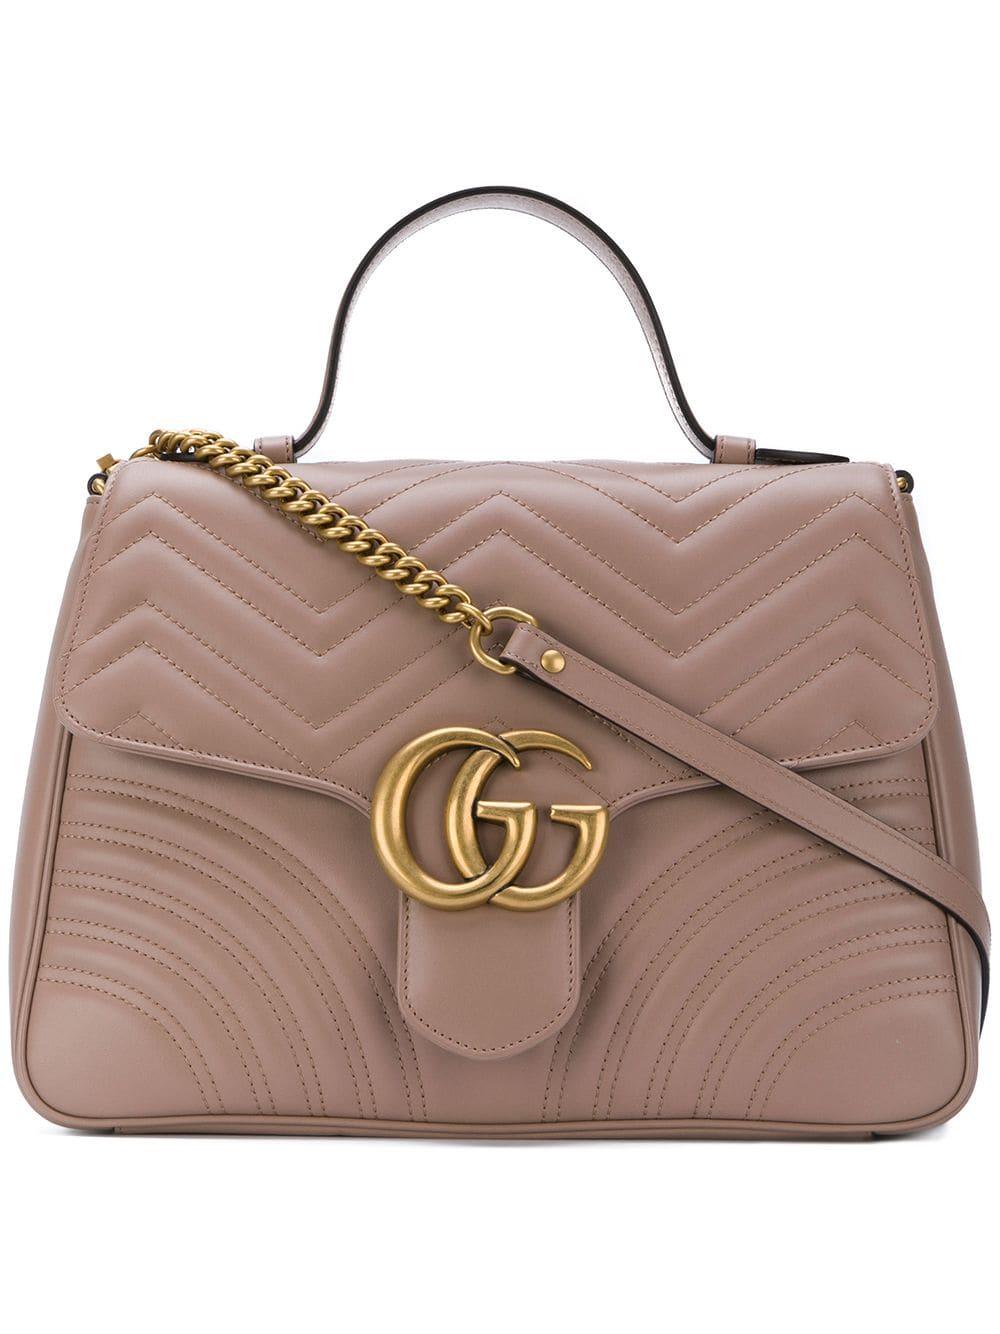 Gucci GG Marmont Medium Top Handle Bag in Brown | Lyst